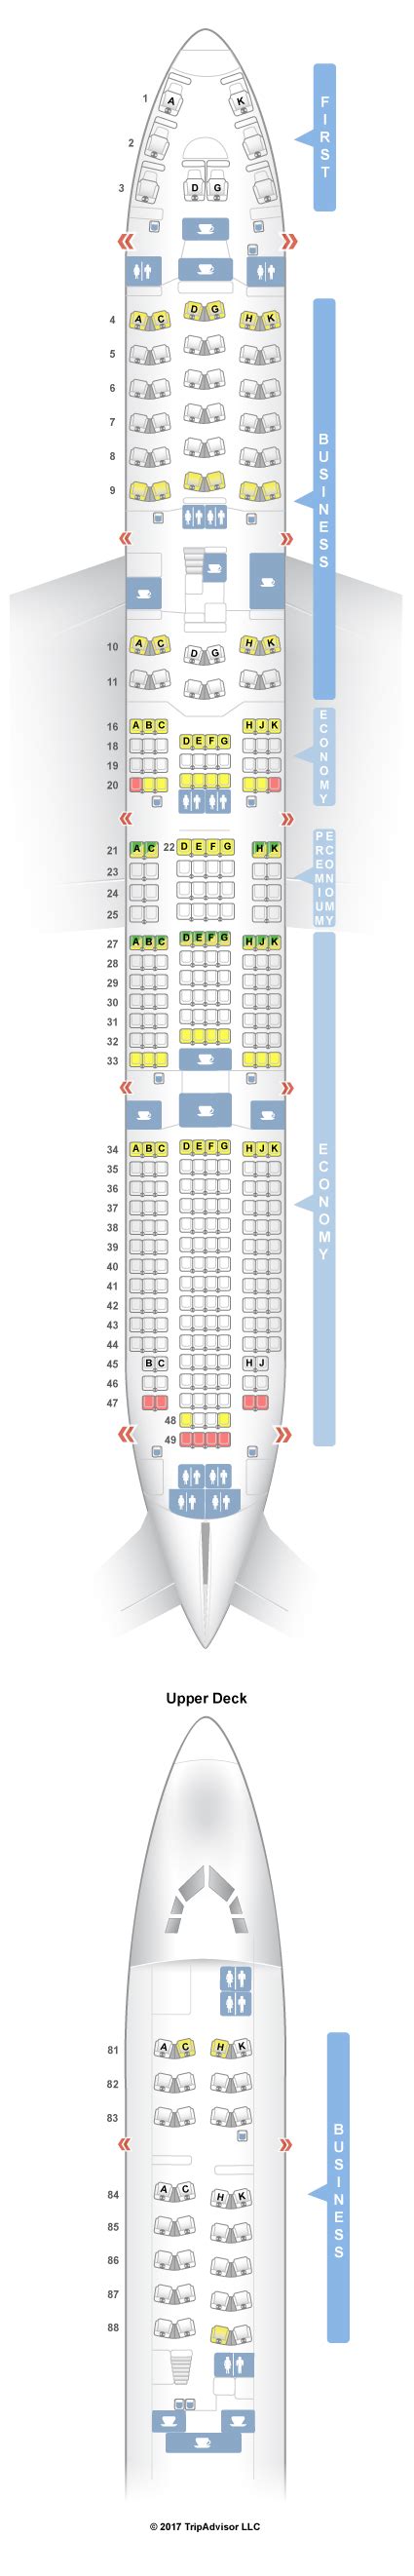 Seatguru lufthansa  Even though Lufthansa’s A340-300s come in a number of different configurations, the seats themselves are the same in all of them and each of them vary only in the number of seats